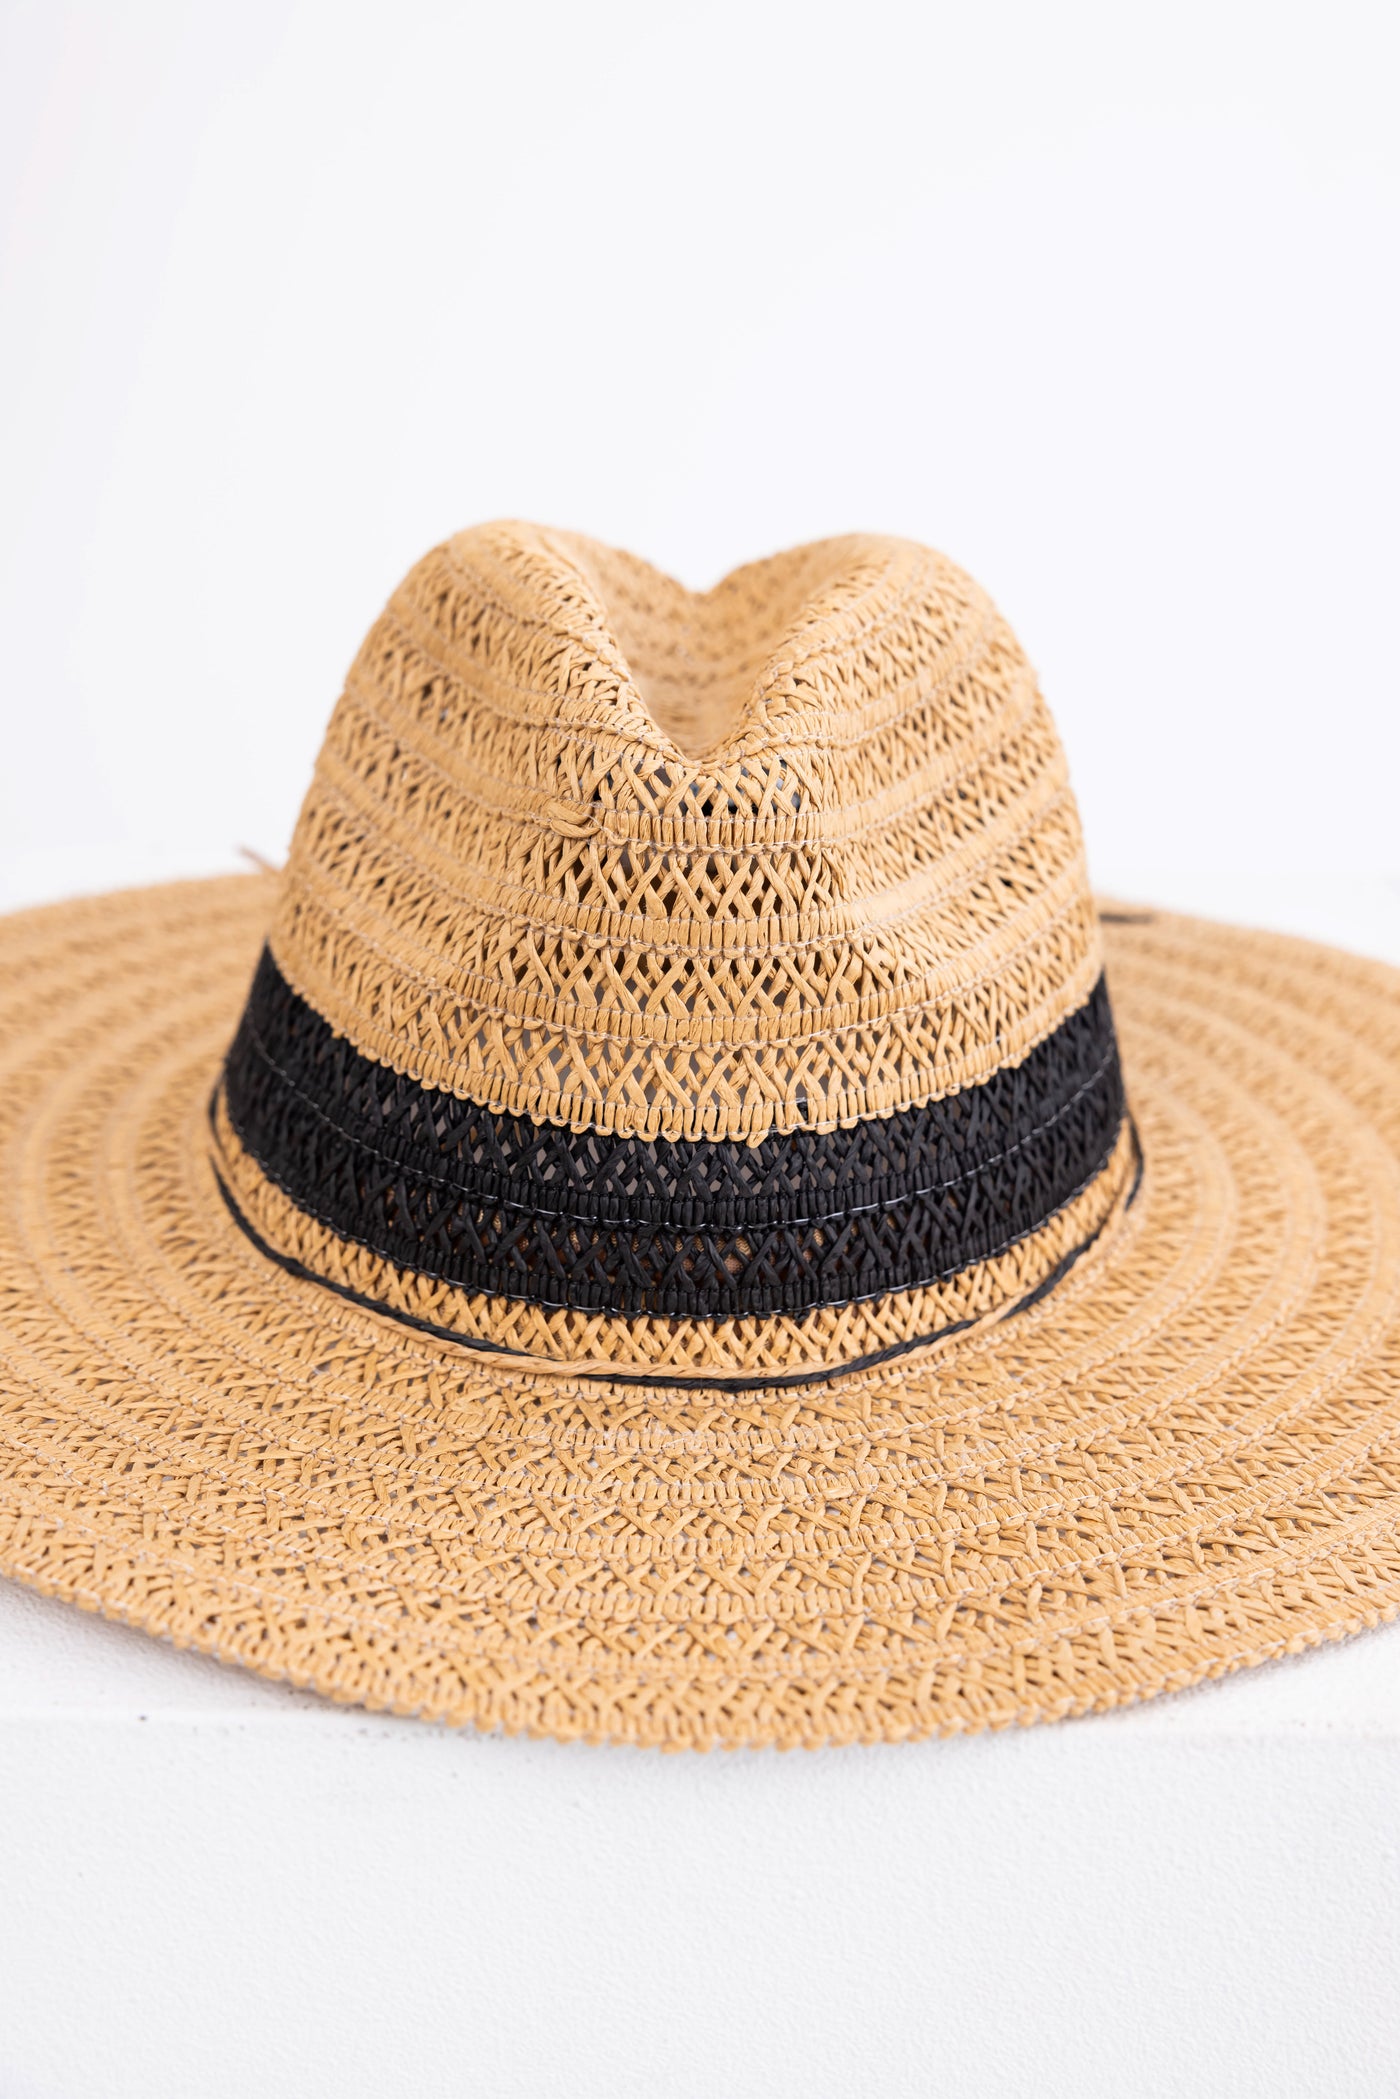 Camel Woven Straw Hat with Black Band Detail